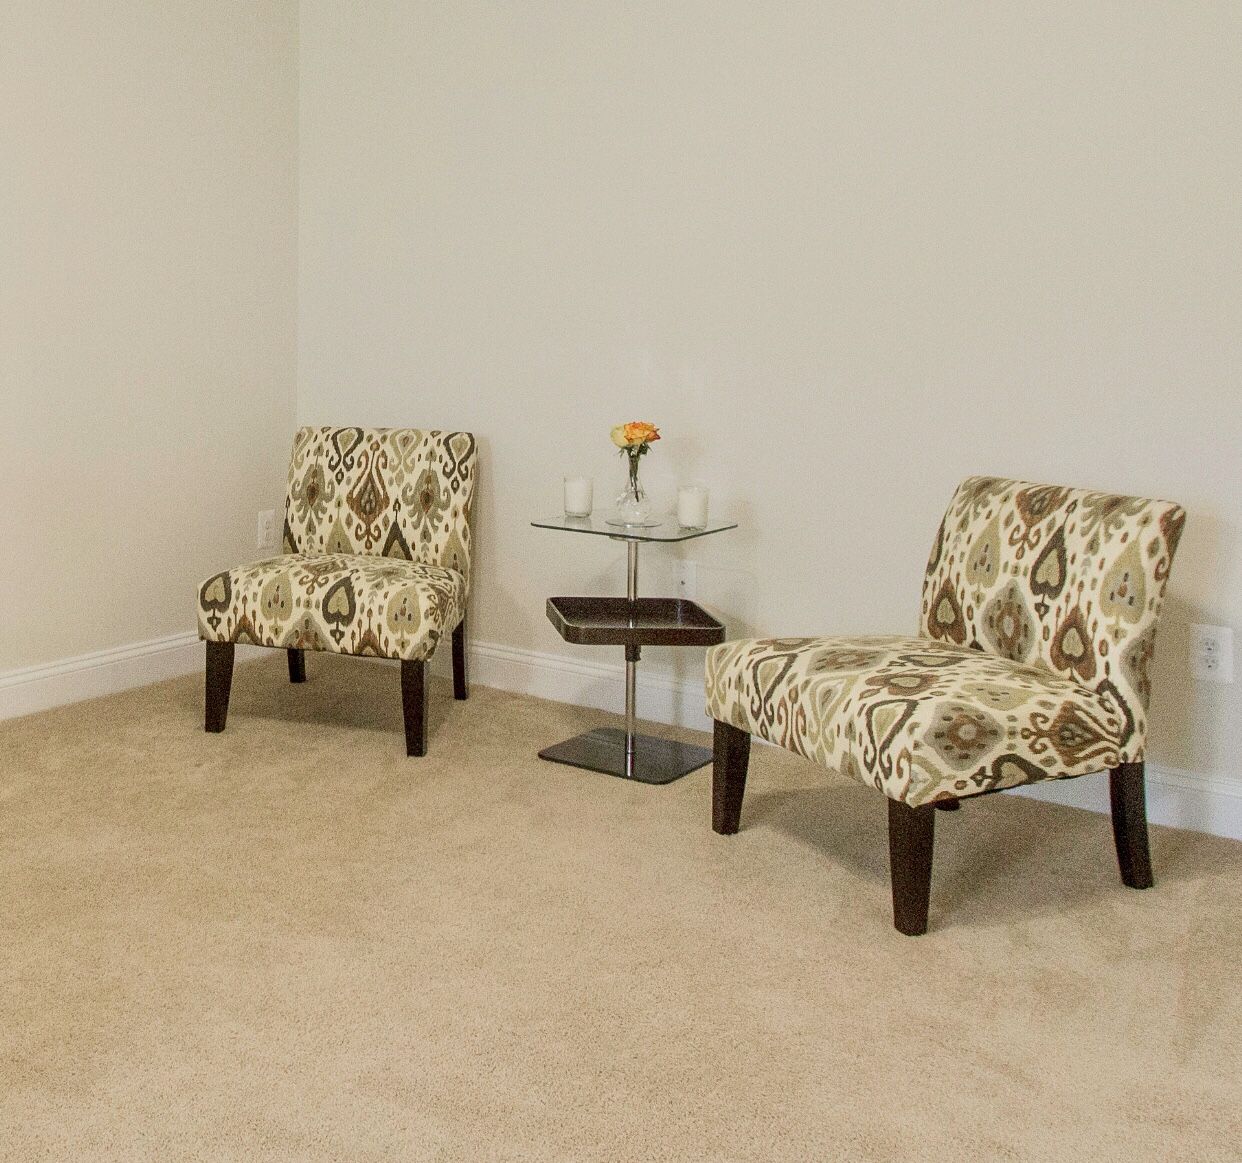 2 Slipper Chairs and End Tables